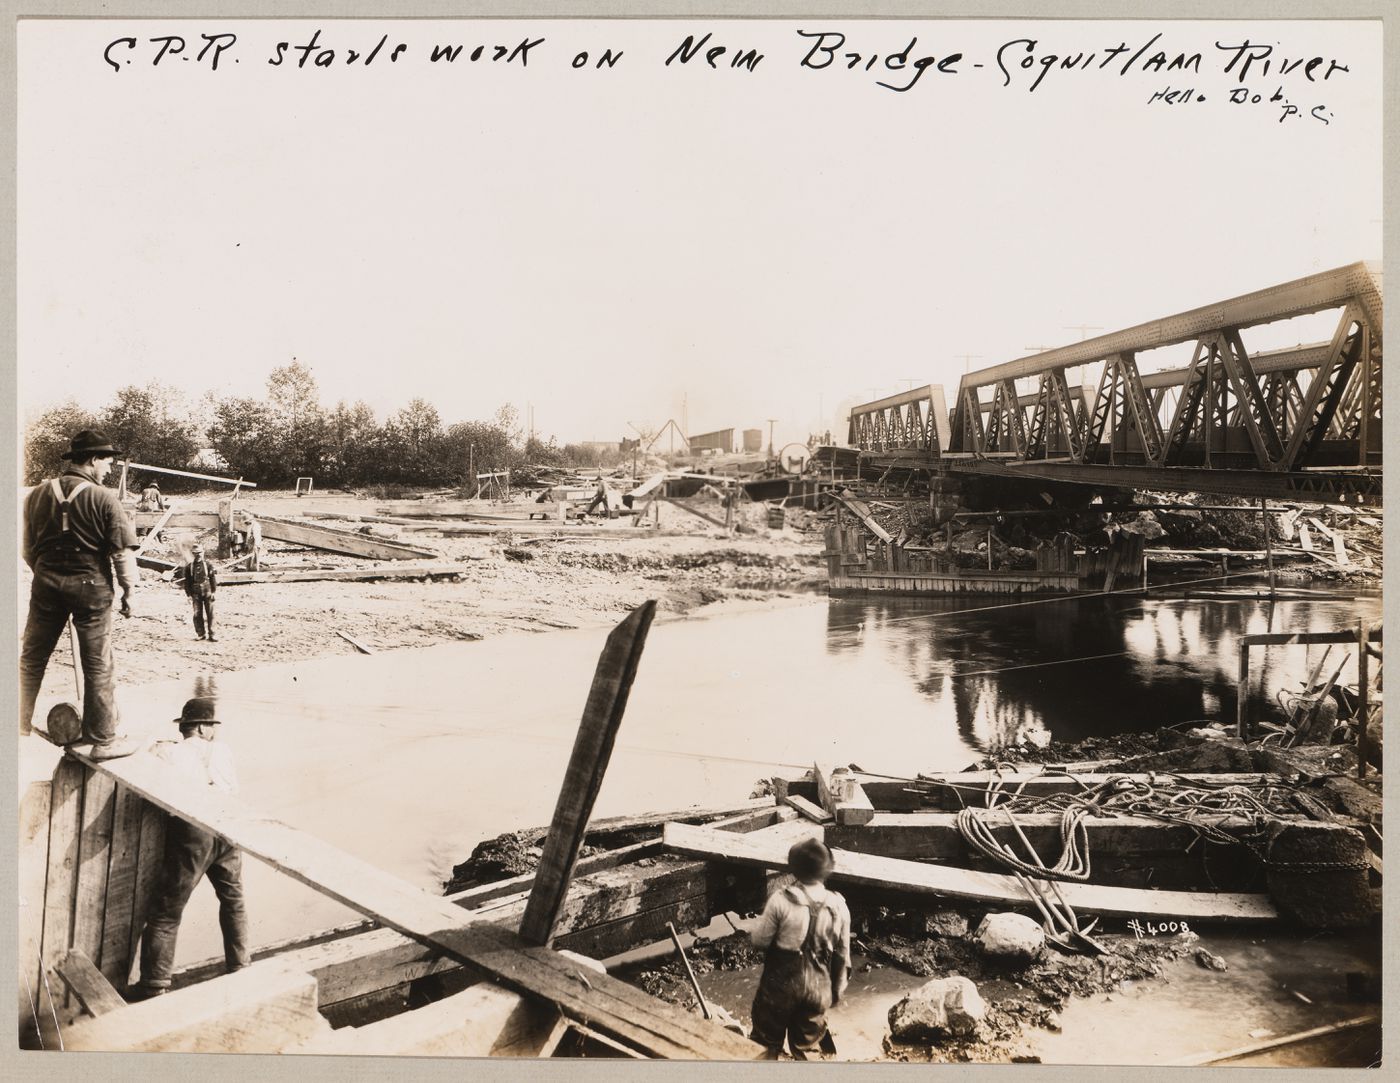 View of the Canadian Pacific Railroad Company triple-track bridge under construction over the Coquitlam River, Coquitlam (now Port Coquitlam), British Columbia